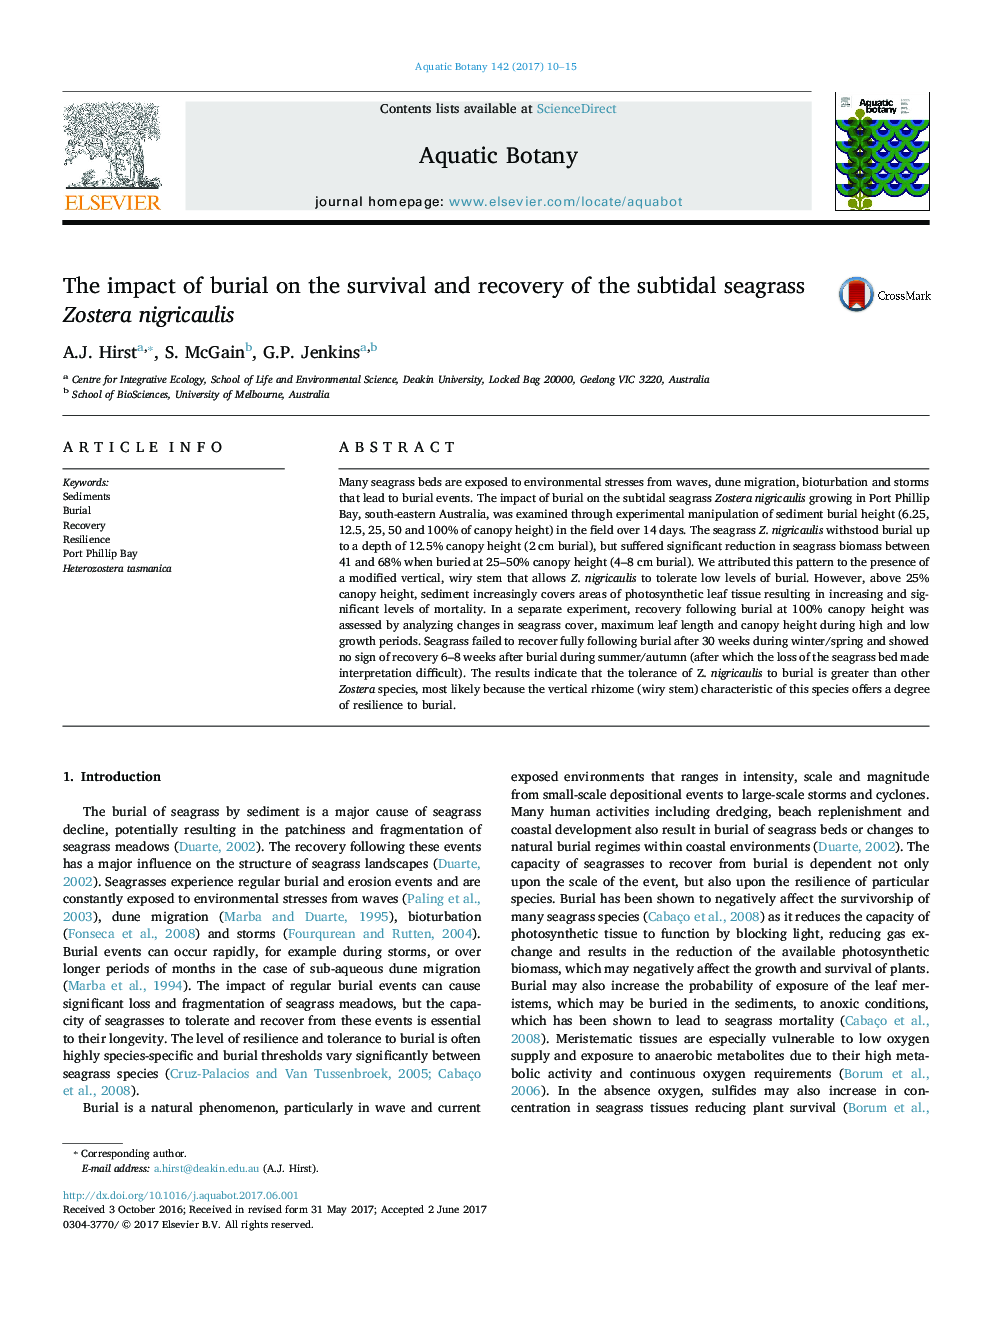 The impact of burial on the survival and recovery of the subtidal seagrass Zostera nigricaulis